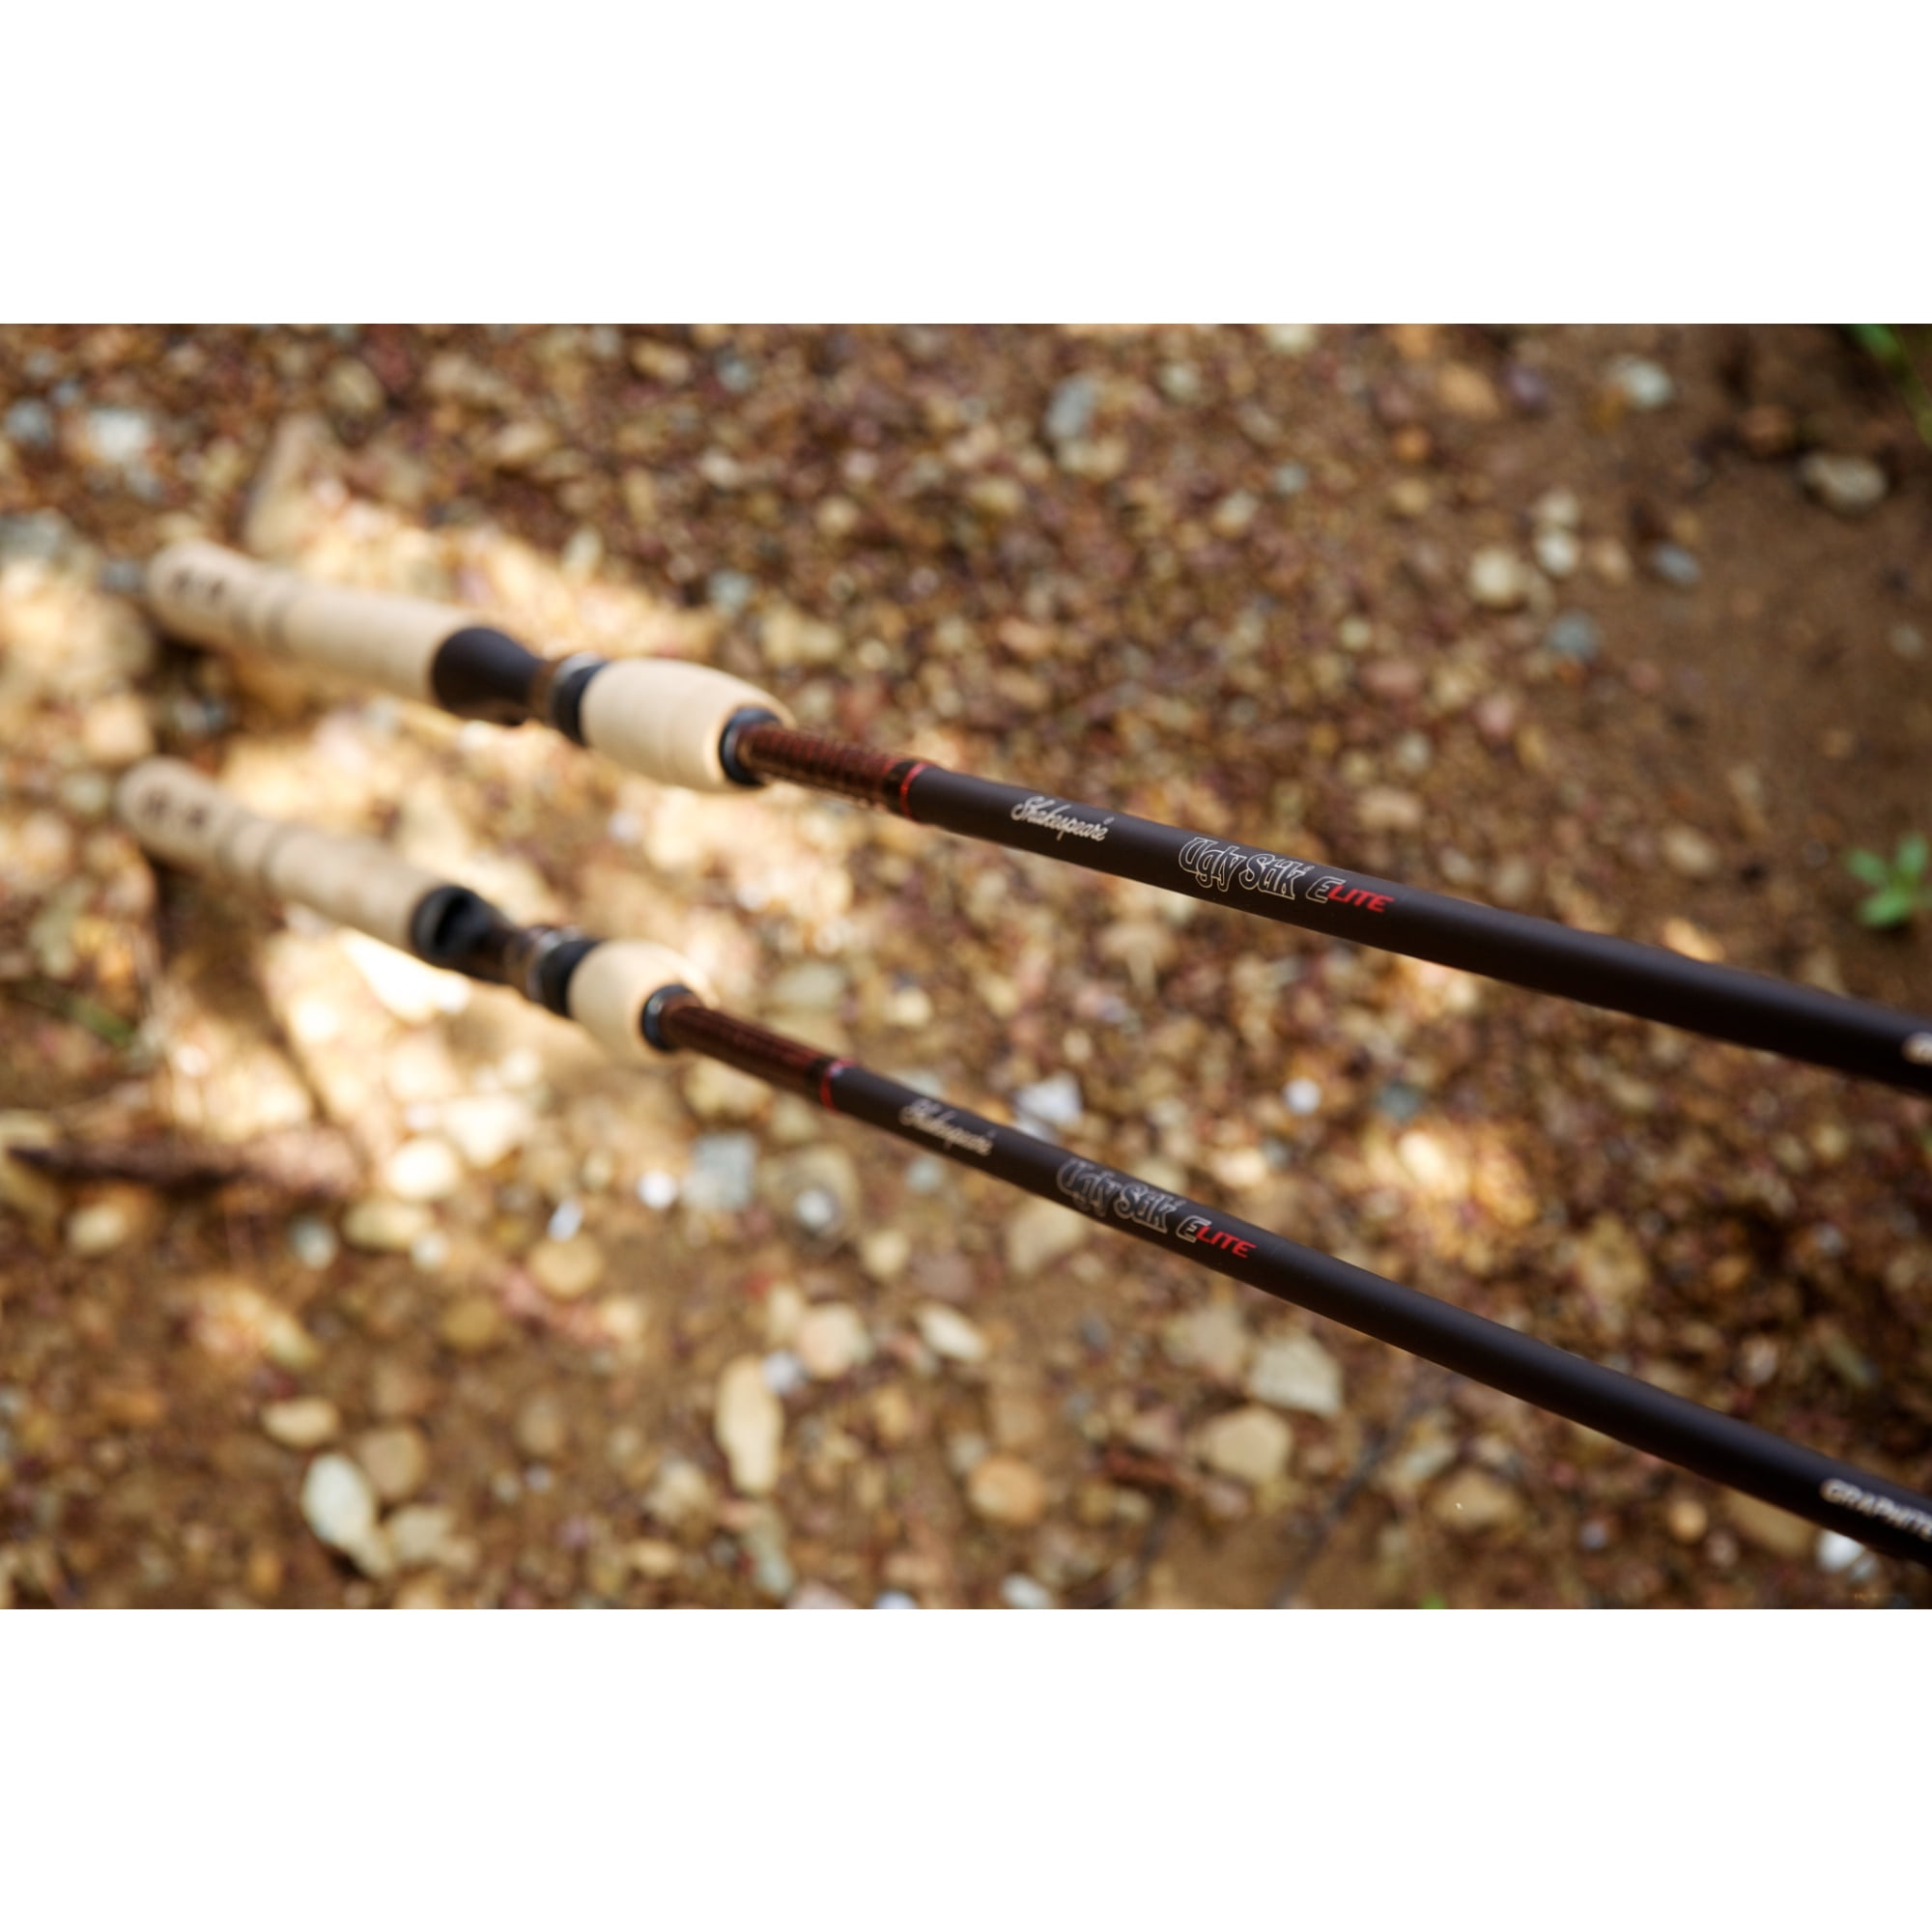 Ugly Stik 6'6” Elite Spinning Fishing Rod and Reel Spinning Combo 